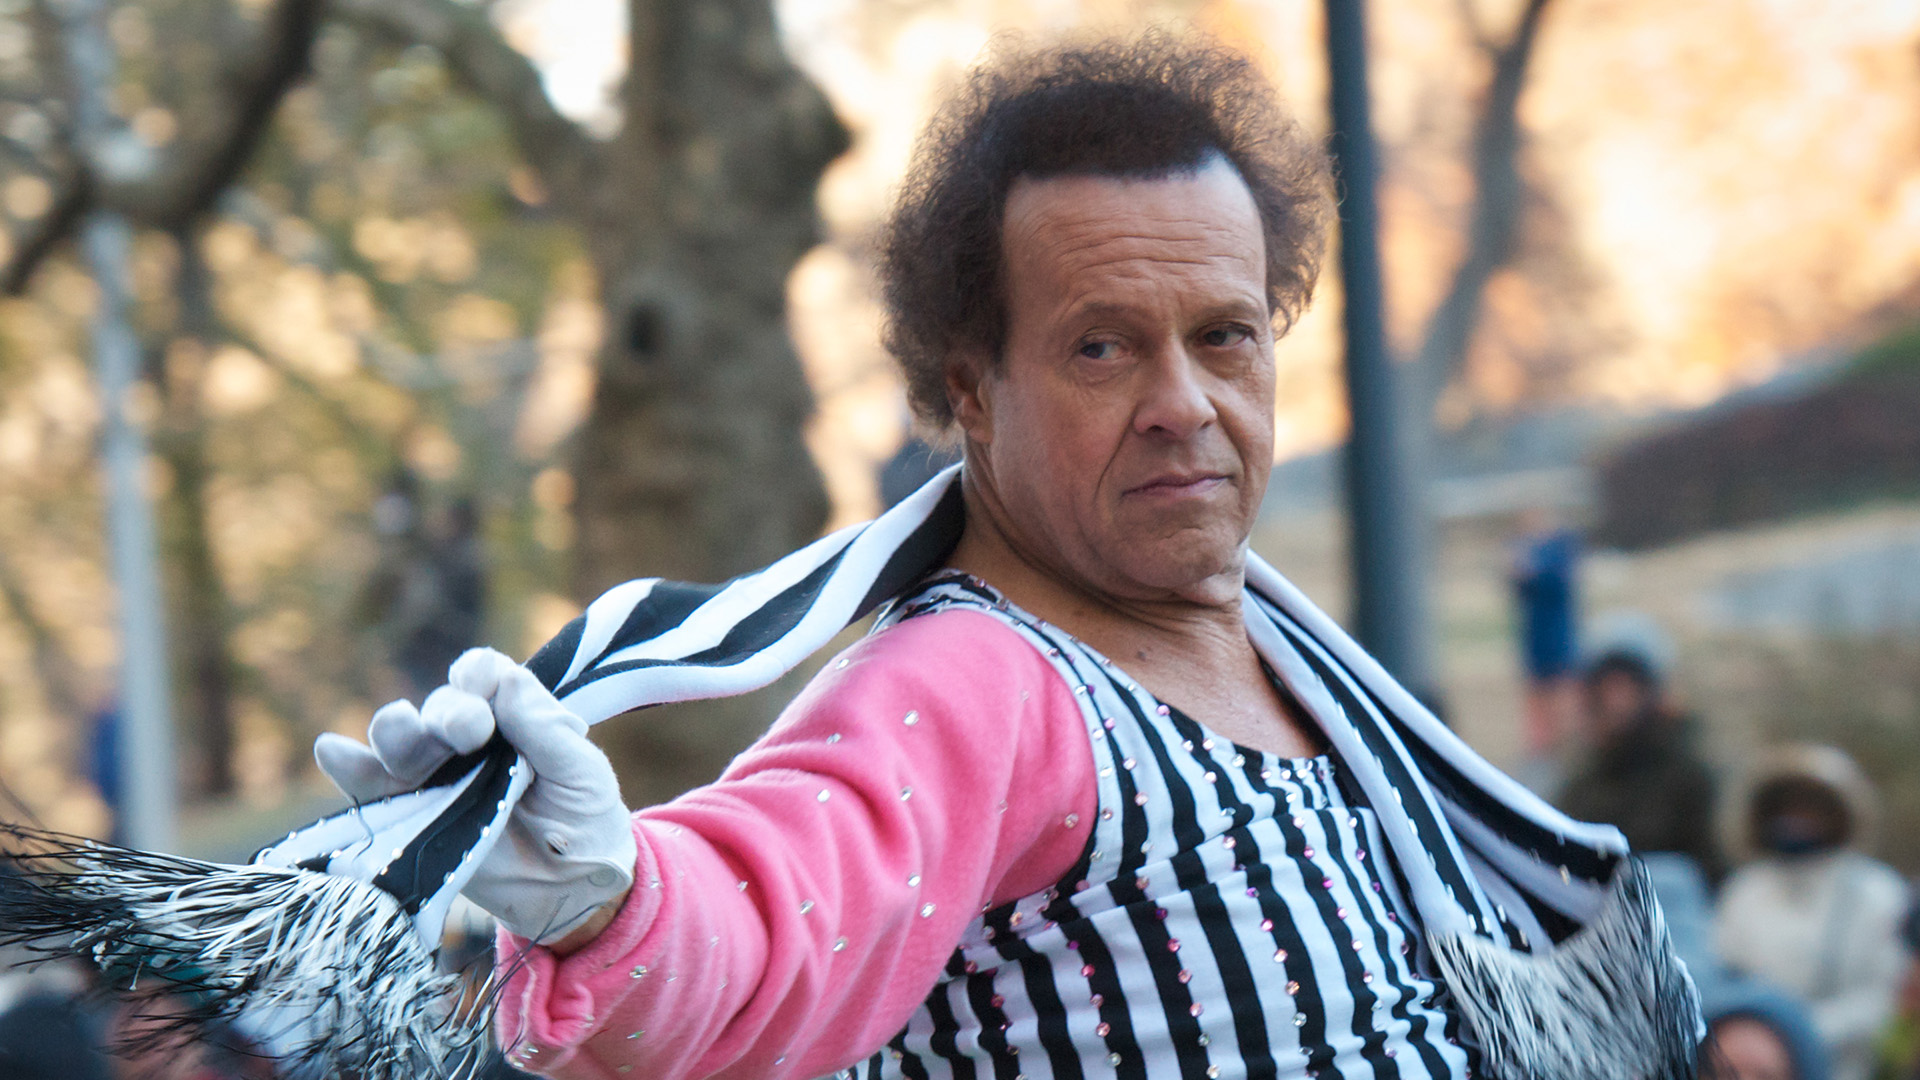 Richard Simmons Owes $220,000 After Failed Lawsuit.